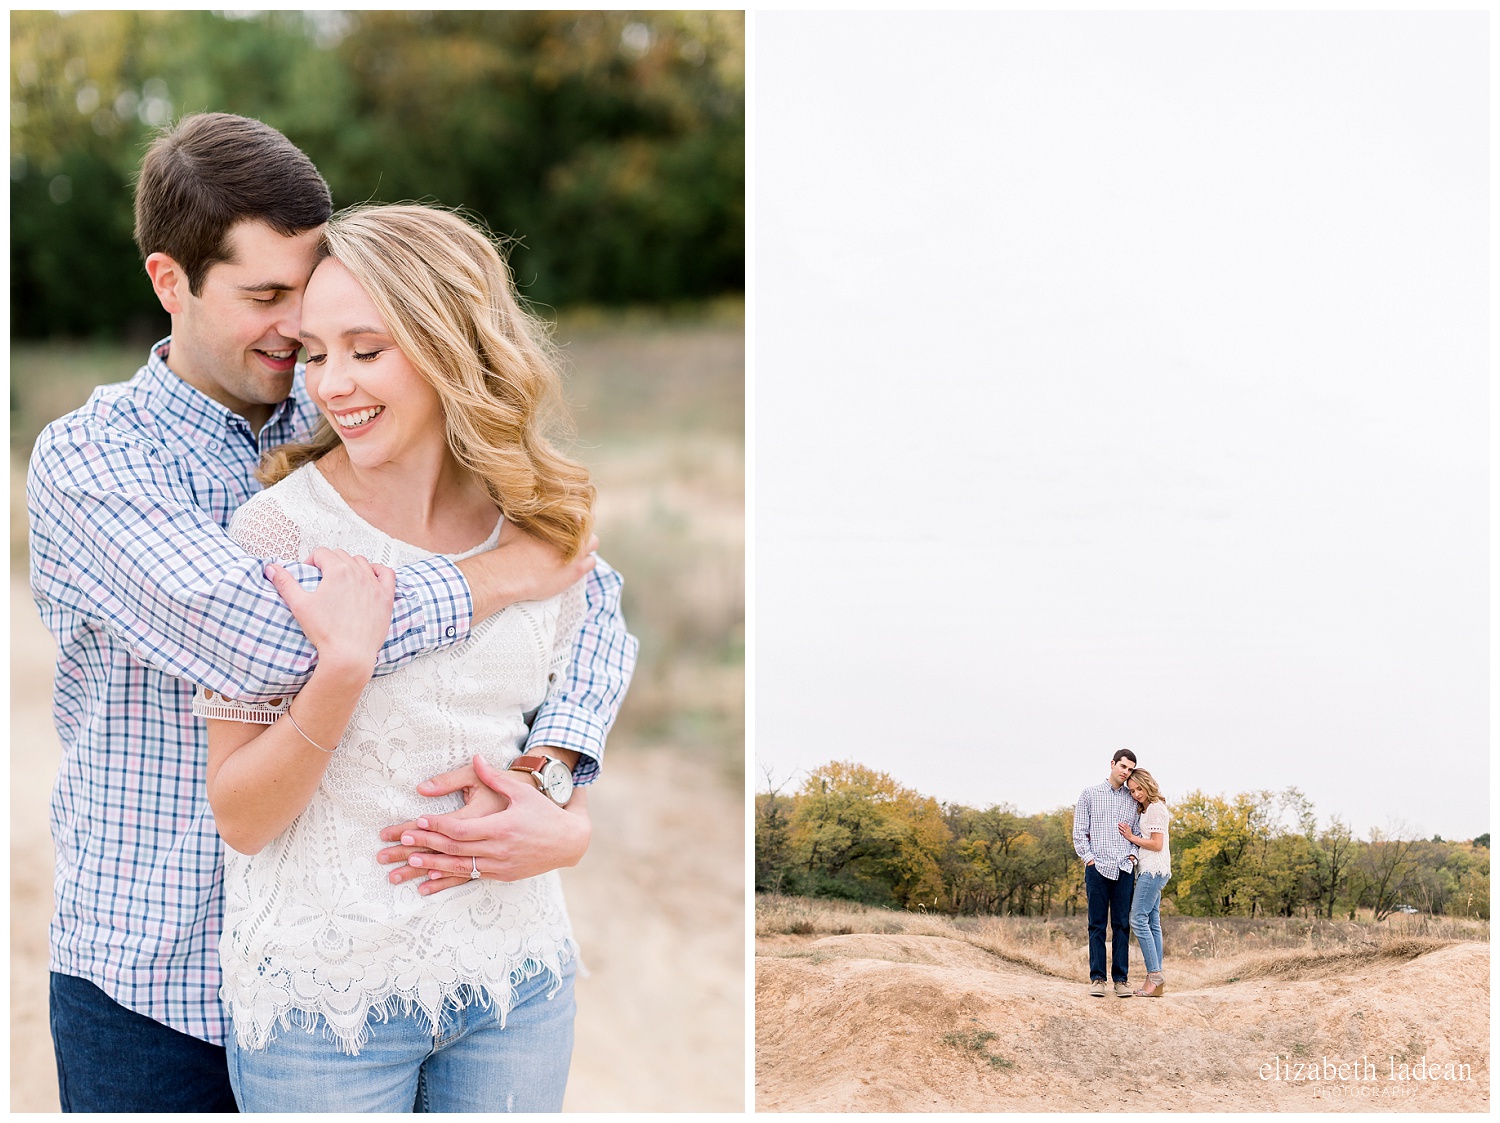 Colorful-Fall-Engagement-Photos-in-KC-C+B-2018-elizabeth-ladean-photography-photo_1787.jpg